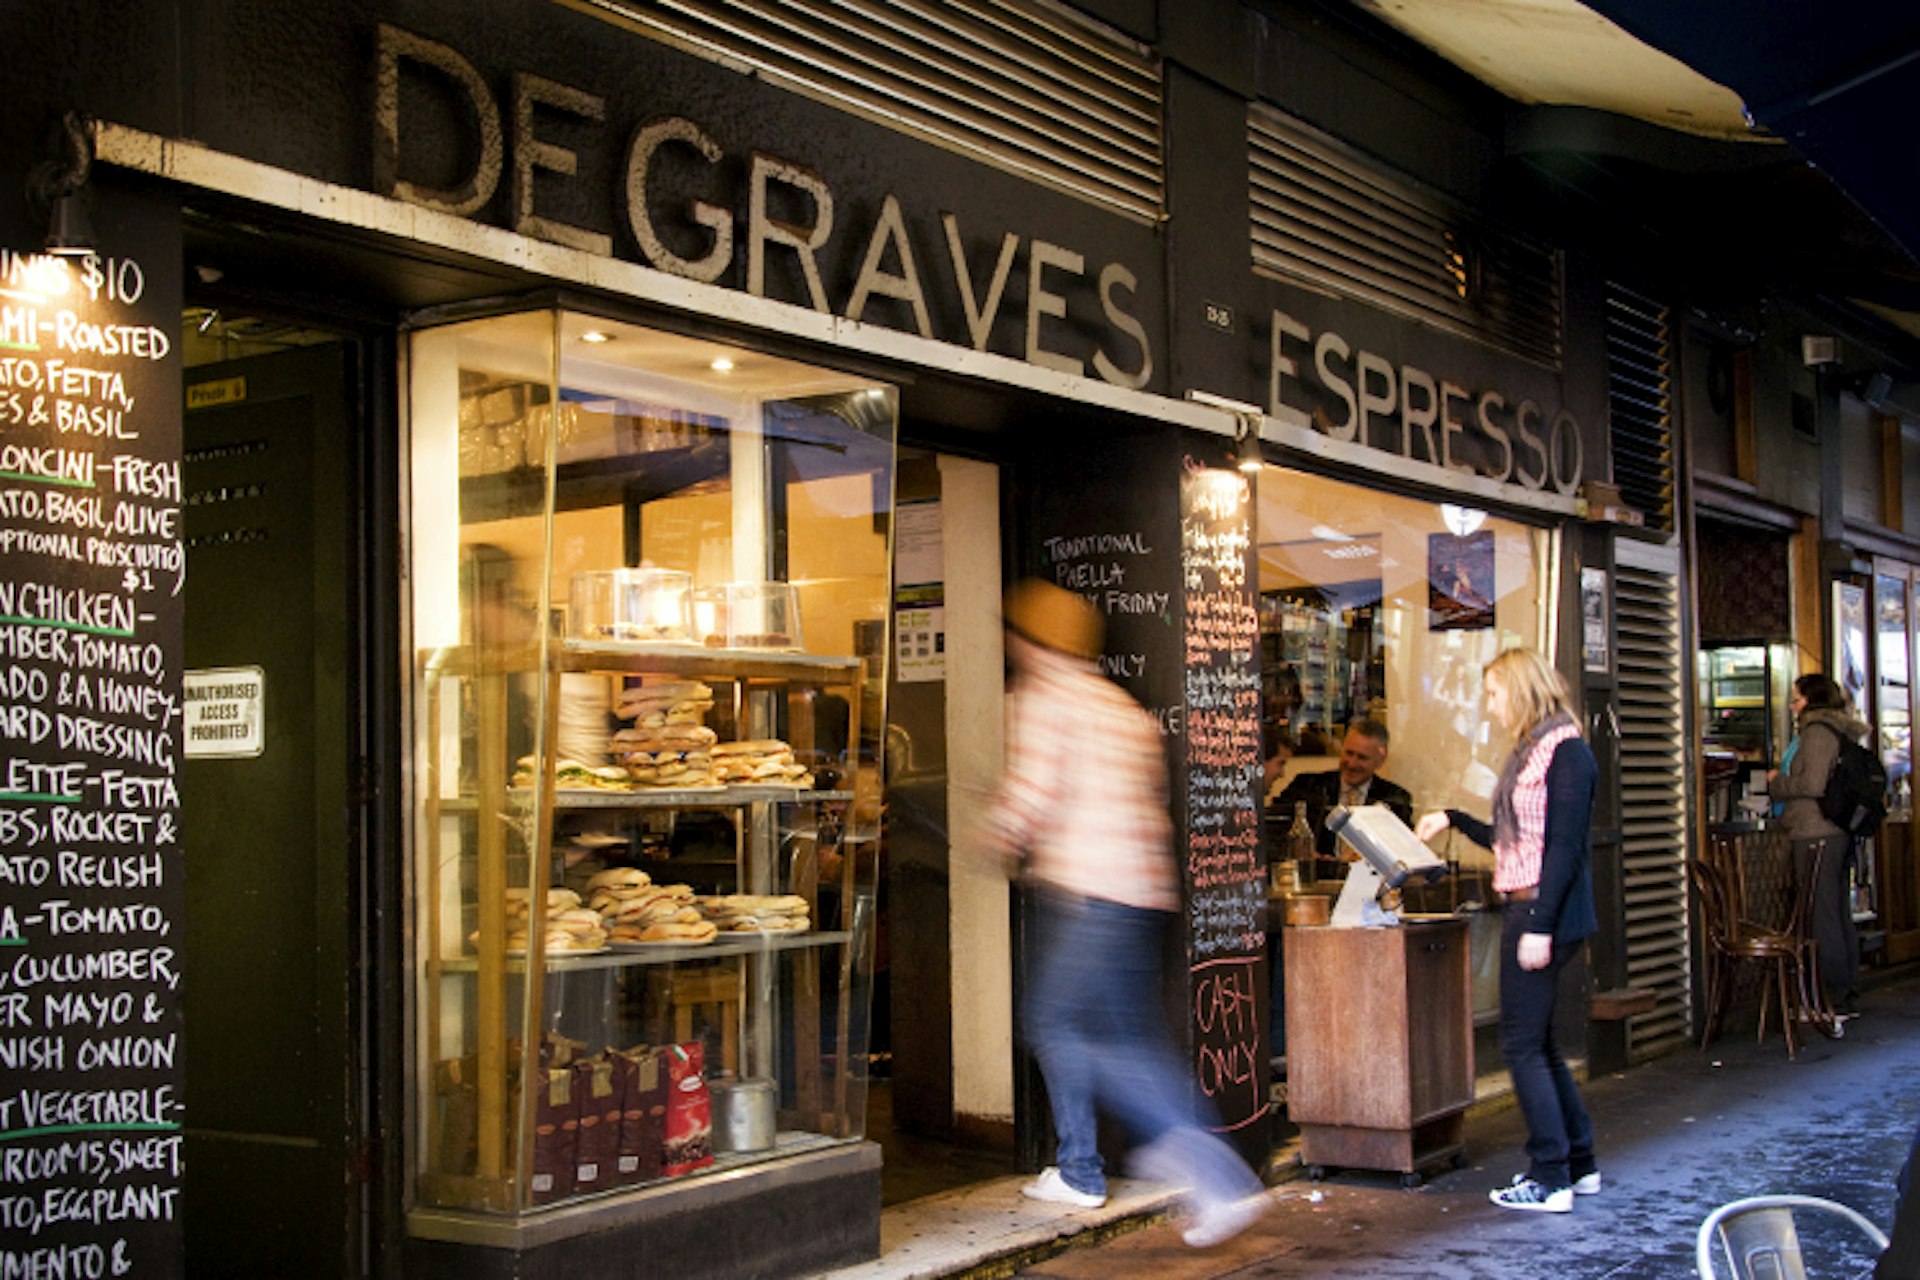 Degraves Espresso in Melbourne / Image by Rachel Lewis / Getty Images